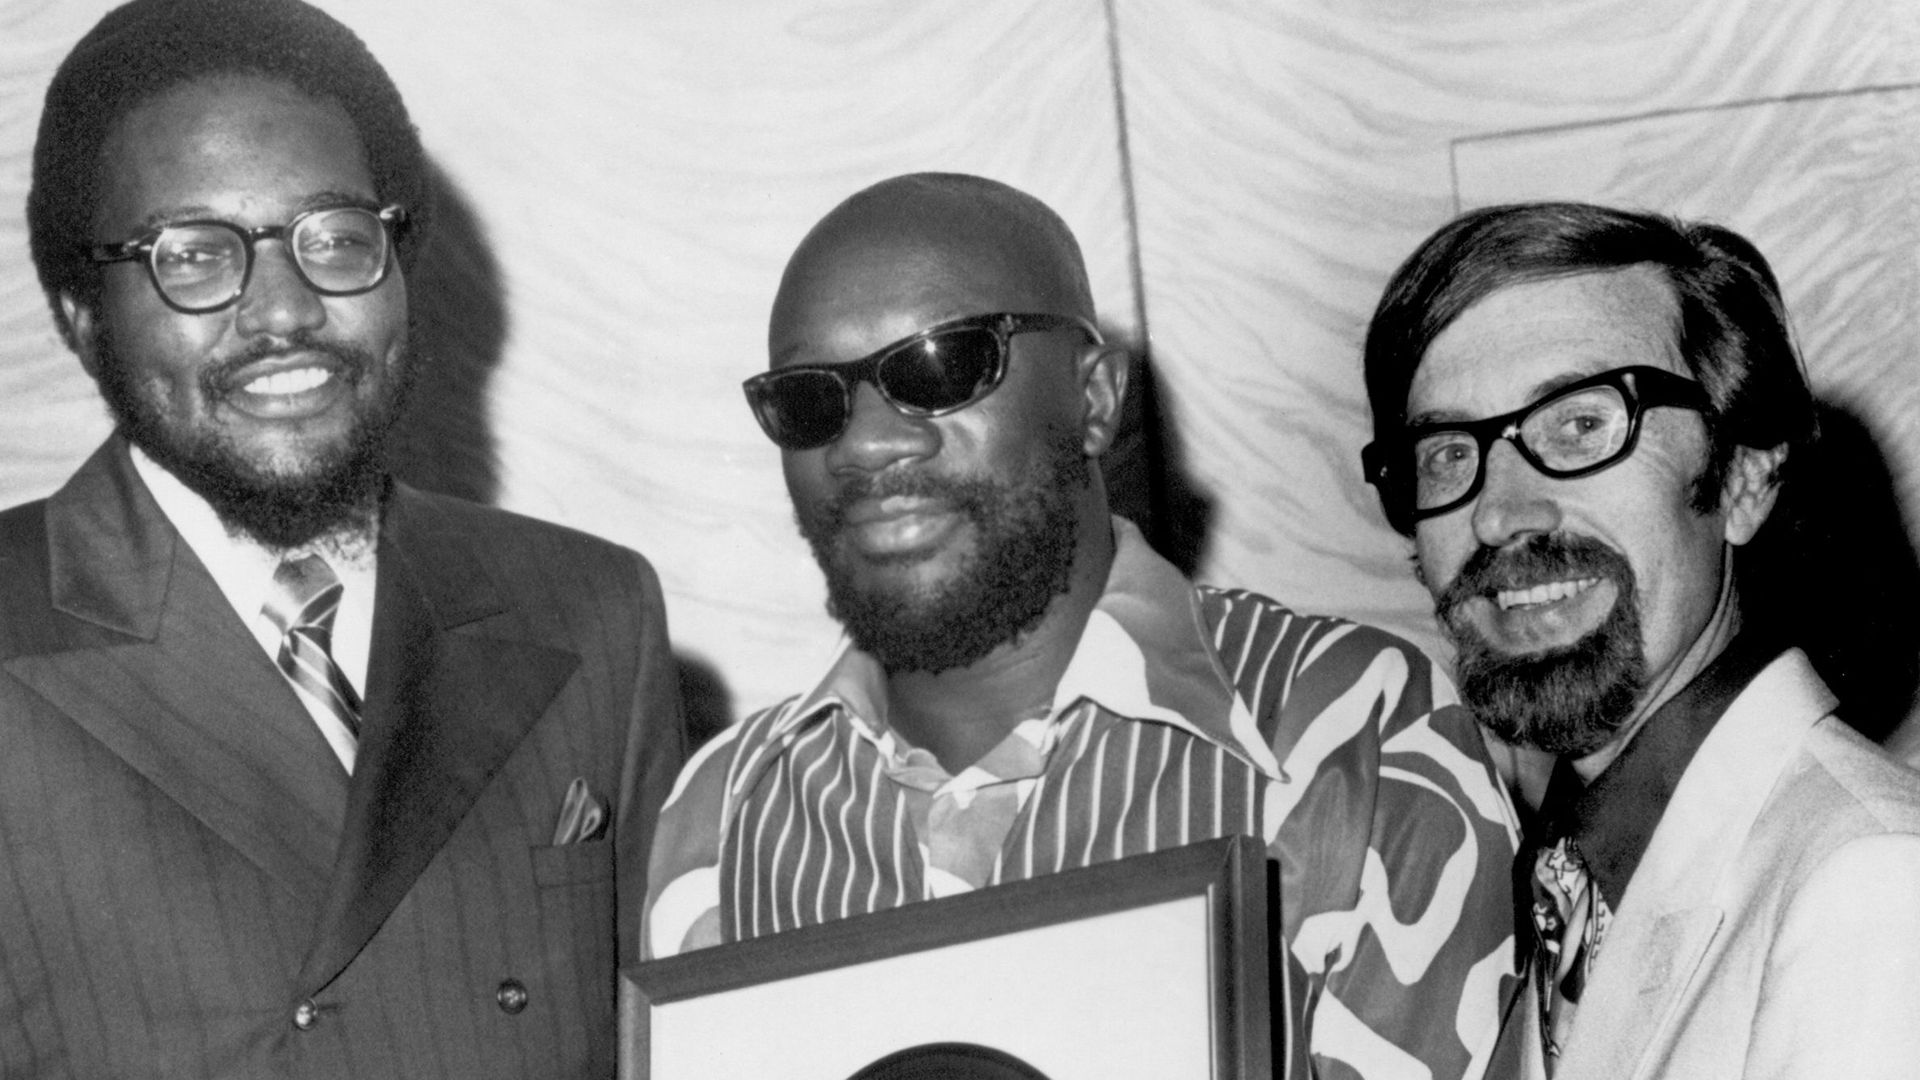 Stax Records executives Al Bell (left) and Jim Stewart (right) present singer and composer Isaac Hayes